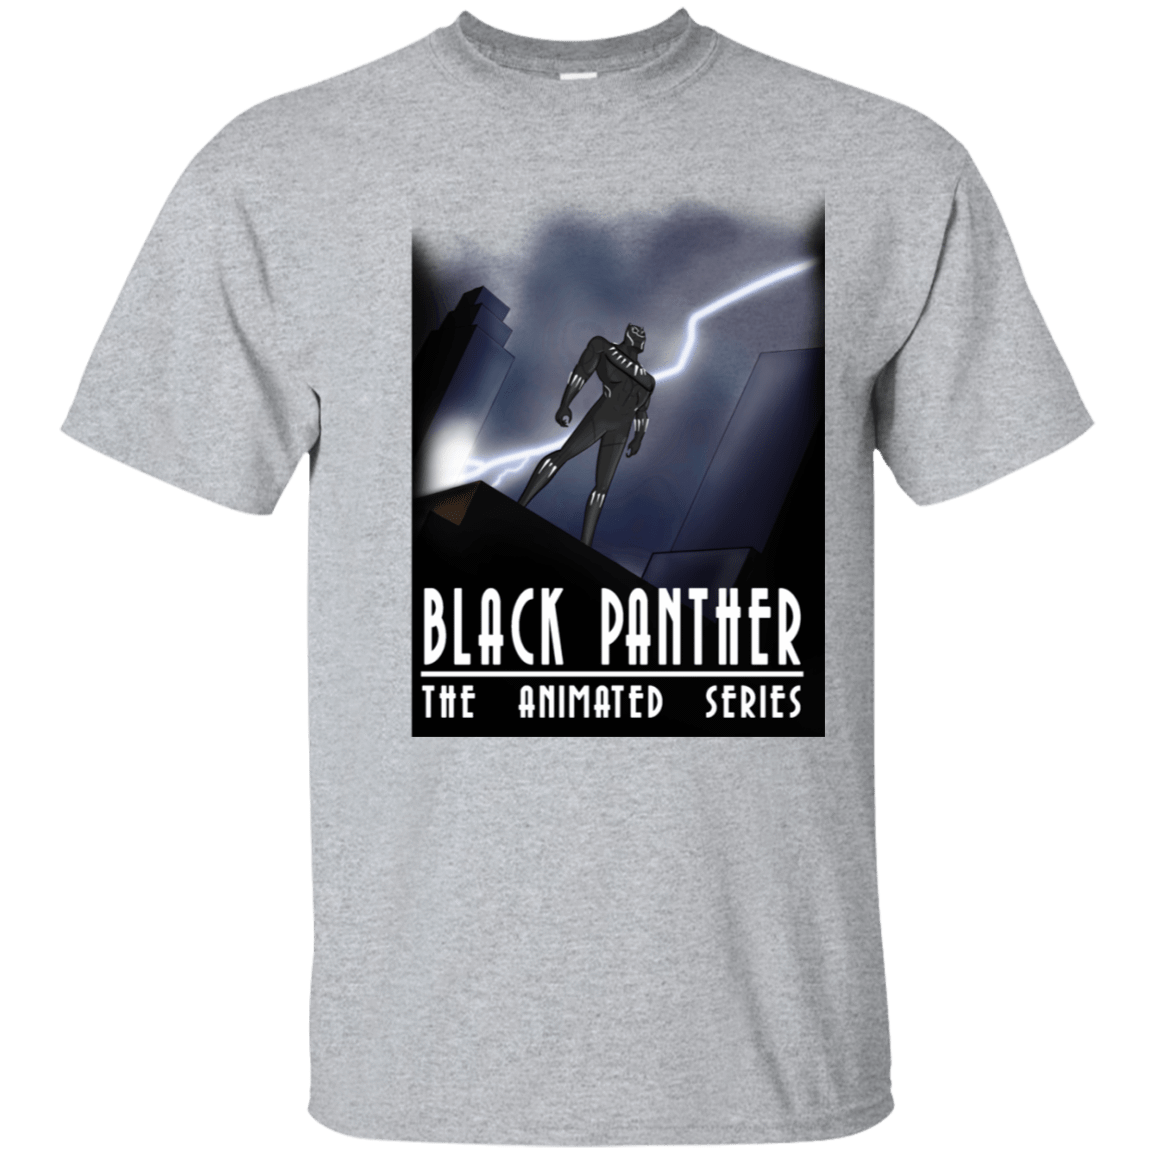 T-Shirts Sport Grey / S Black Panther The Animated Series T-Shirt